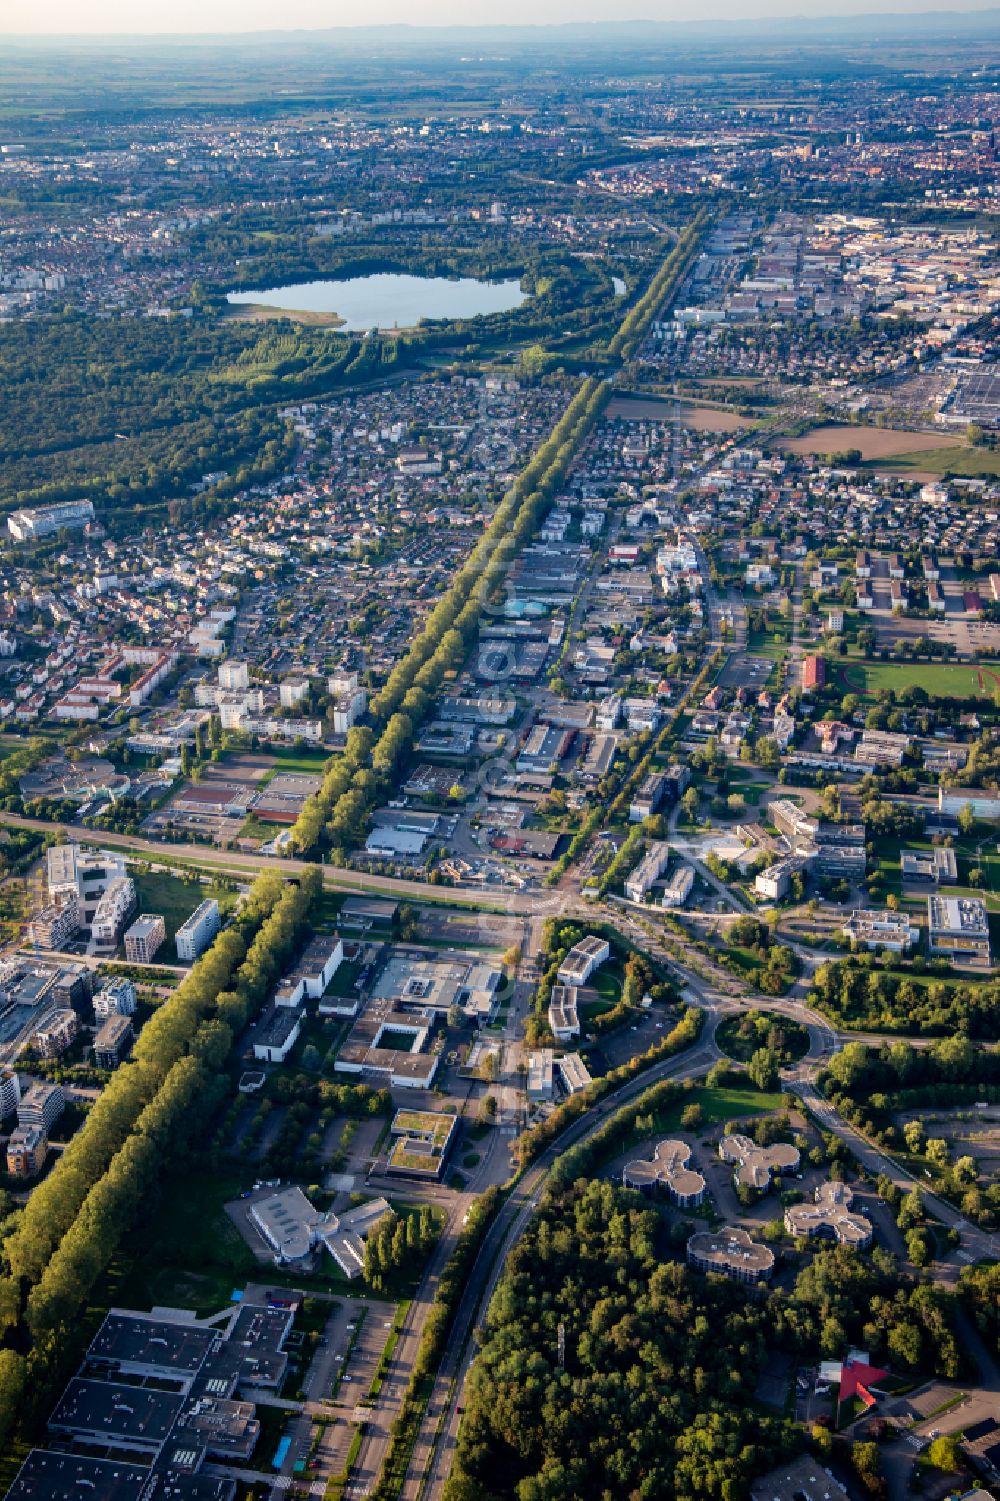 Aerial photograph Illkirch-Graffenstaden - Channel flow and river banks of the waterway shipping Canal du Rhone au Rhin on street Rue de l'Industrie in Illkirch-Graffenstaden in Grand Est, France